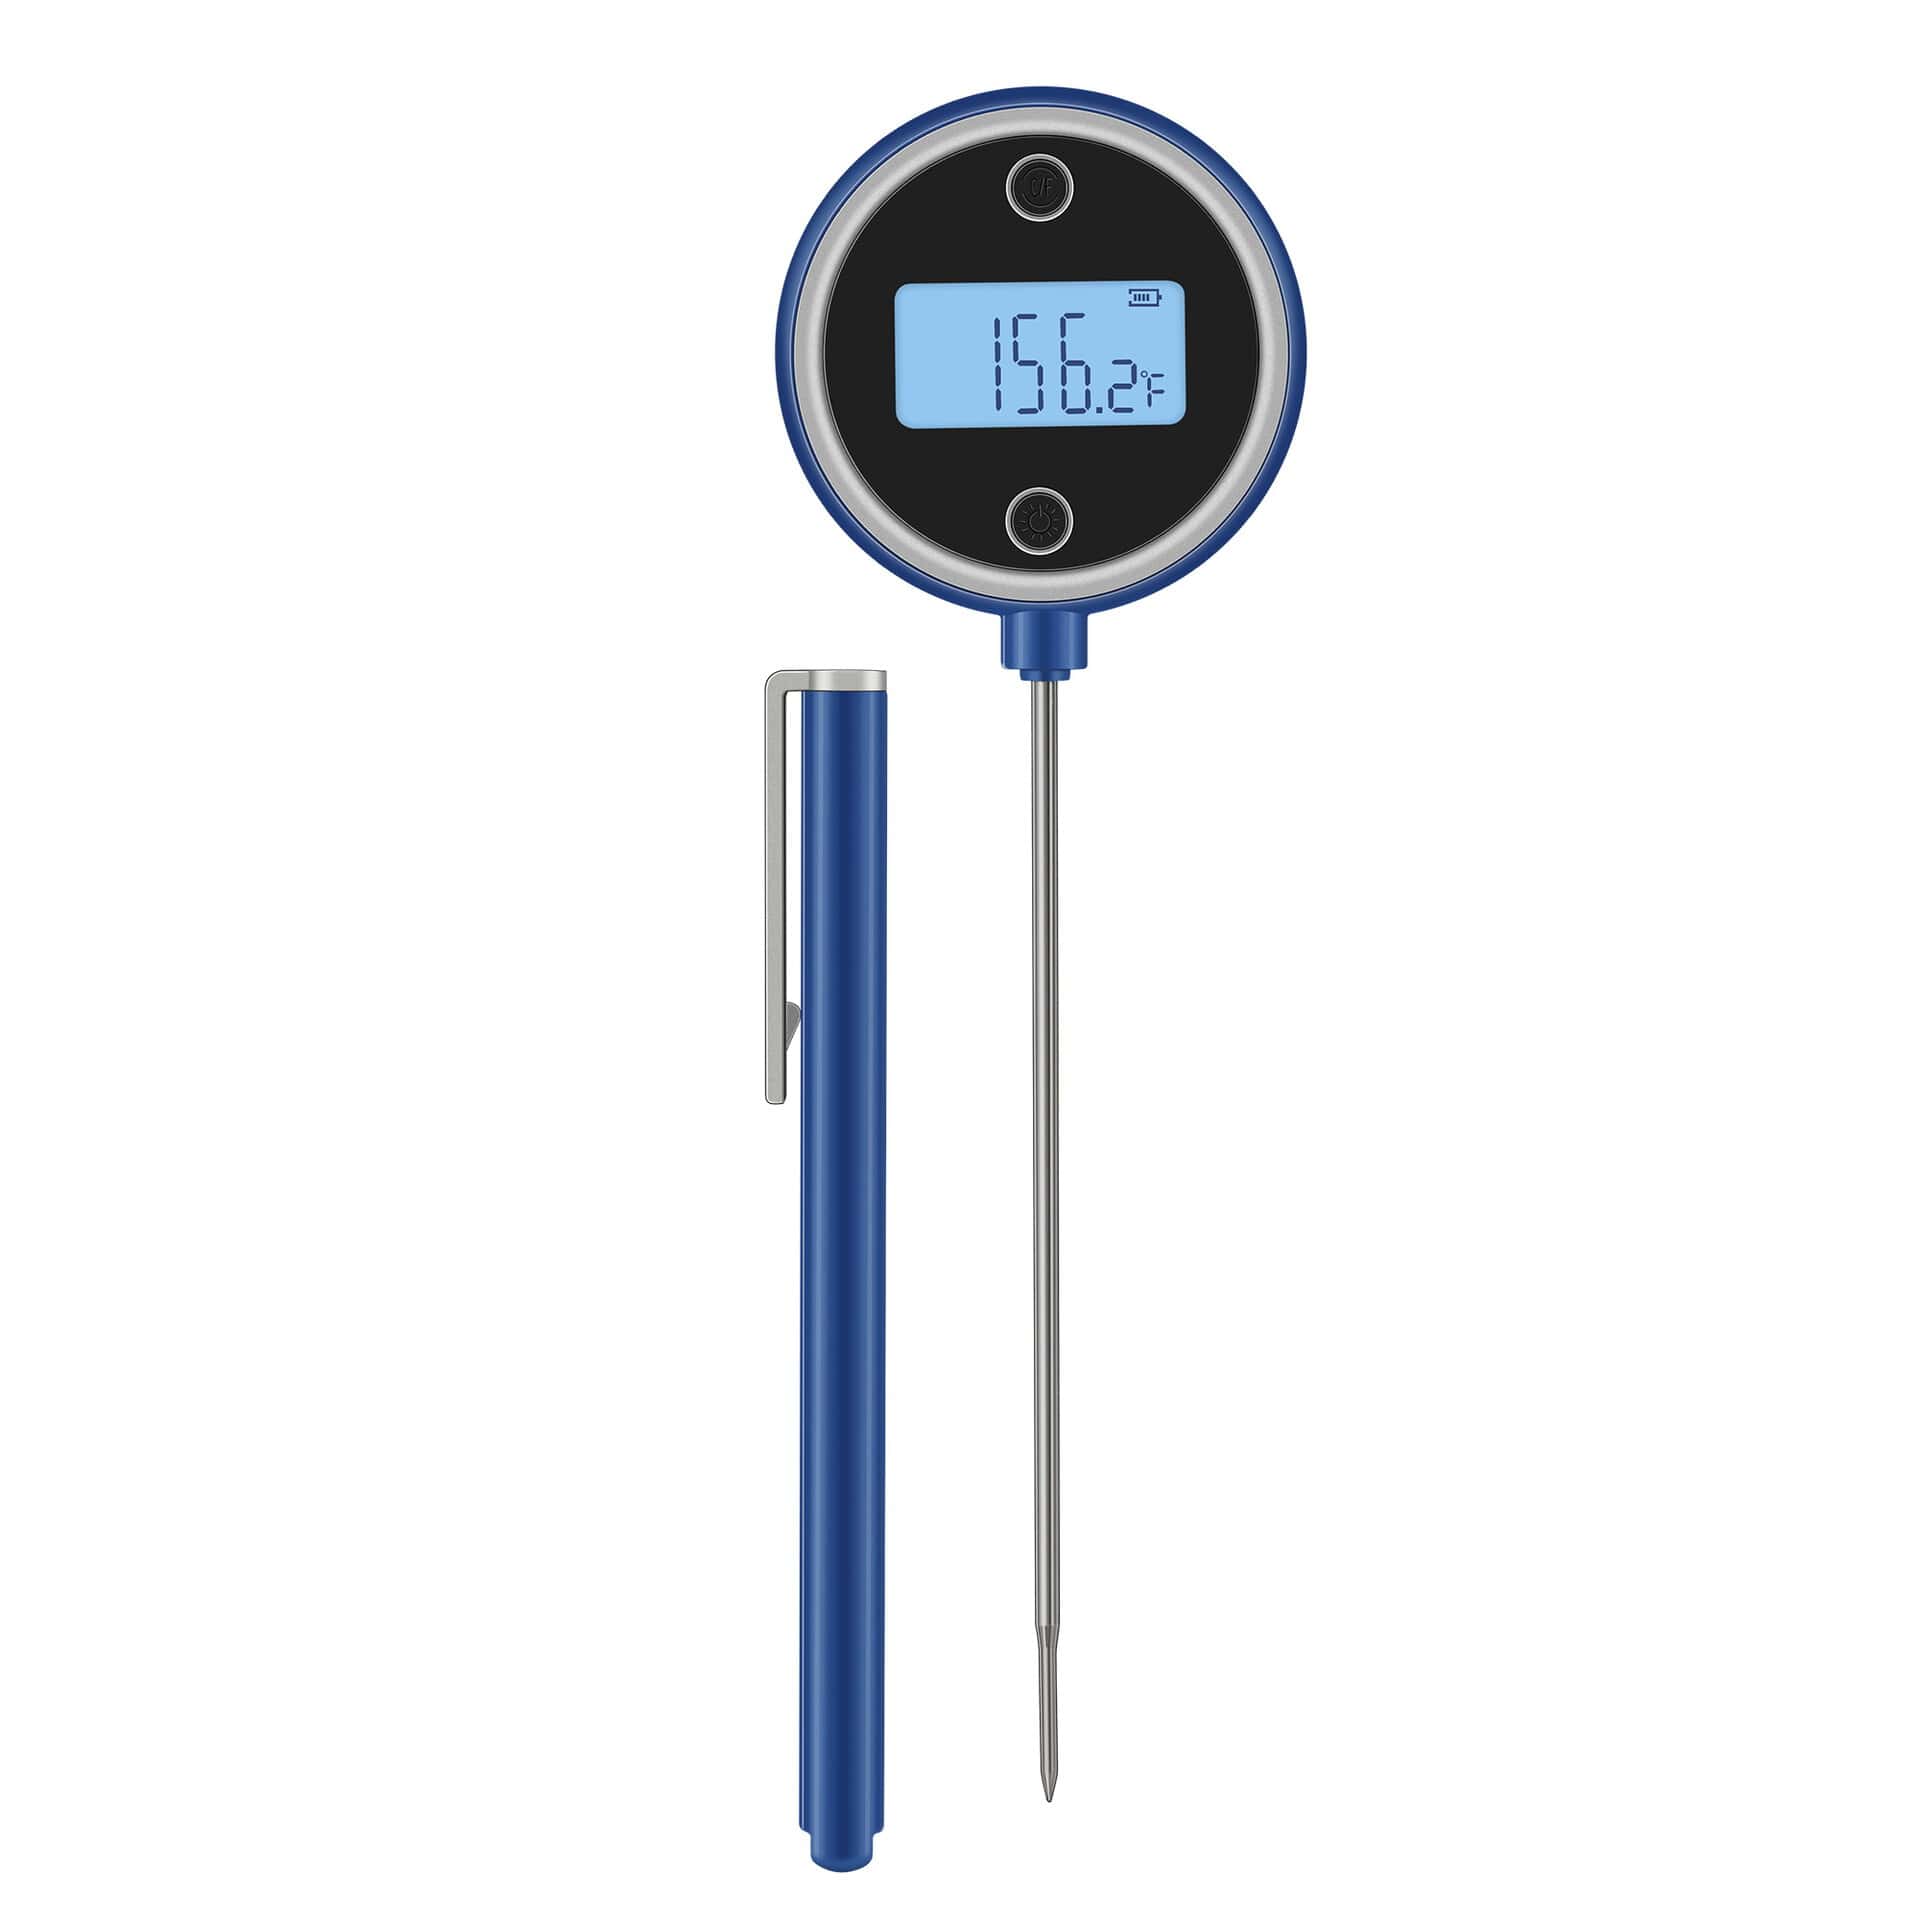 Red - Raw Meat Easytemp Pocket Stem Thermometer - store it in the pocket of your chefs whites! foldaway probe and auto on / off functions 